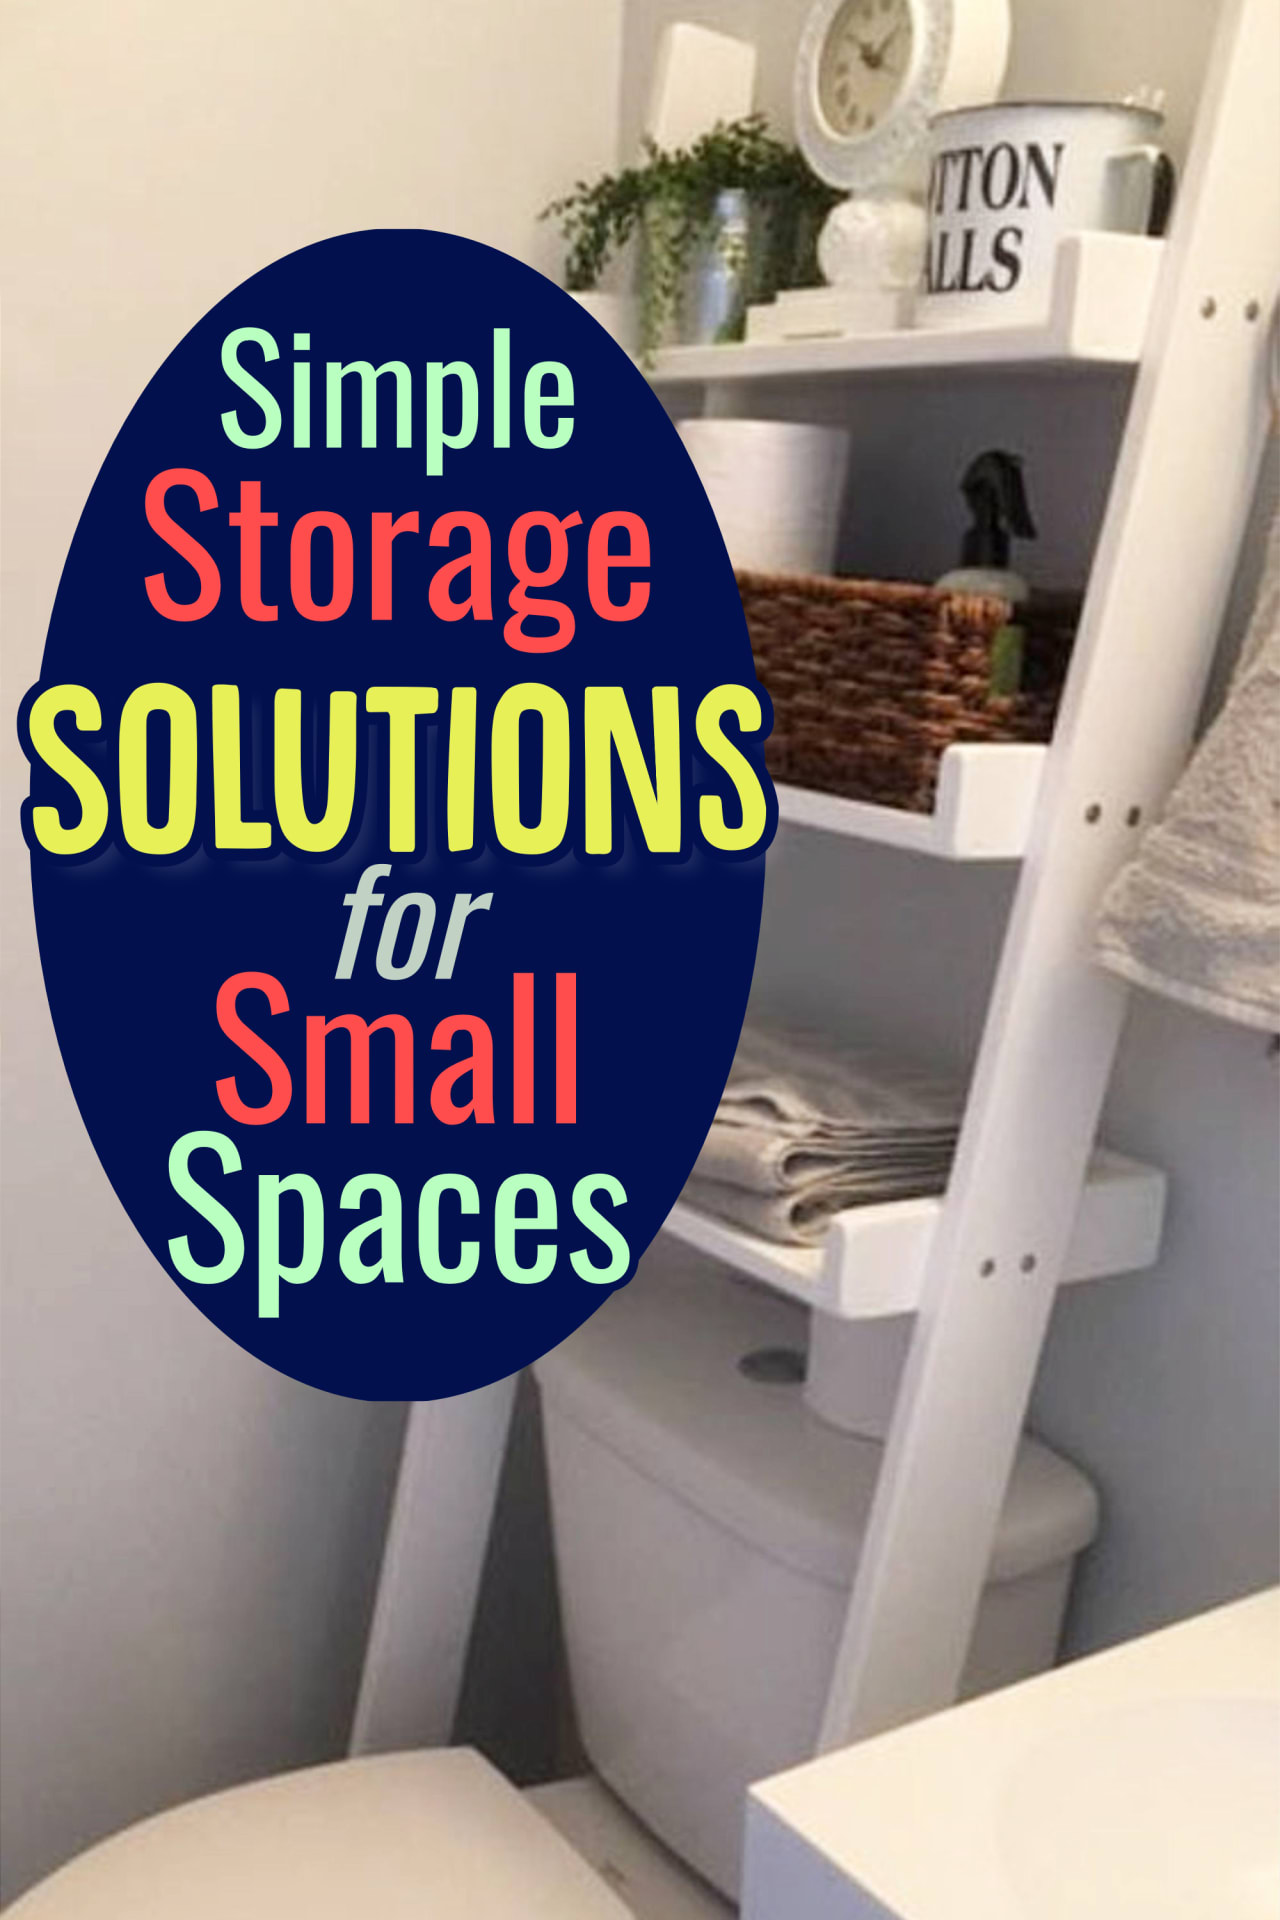 Storage and organization hacks for getting organized at home on a budget - Get organized at home with these creative storage solutions for small spaces in your bedroom, tiny apartment, little flat, small kitchen, living room, bathroom and more for making the most of small spaces for serious clutter control.  Go from cluttered mess to organized success when uncluttering your home!